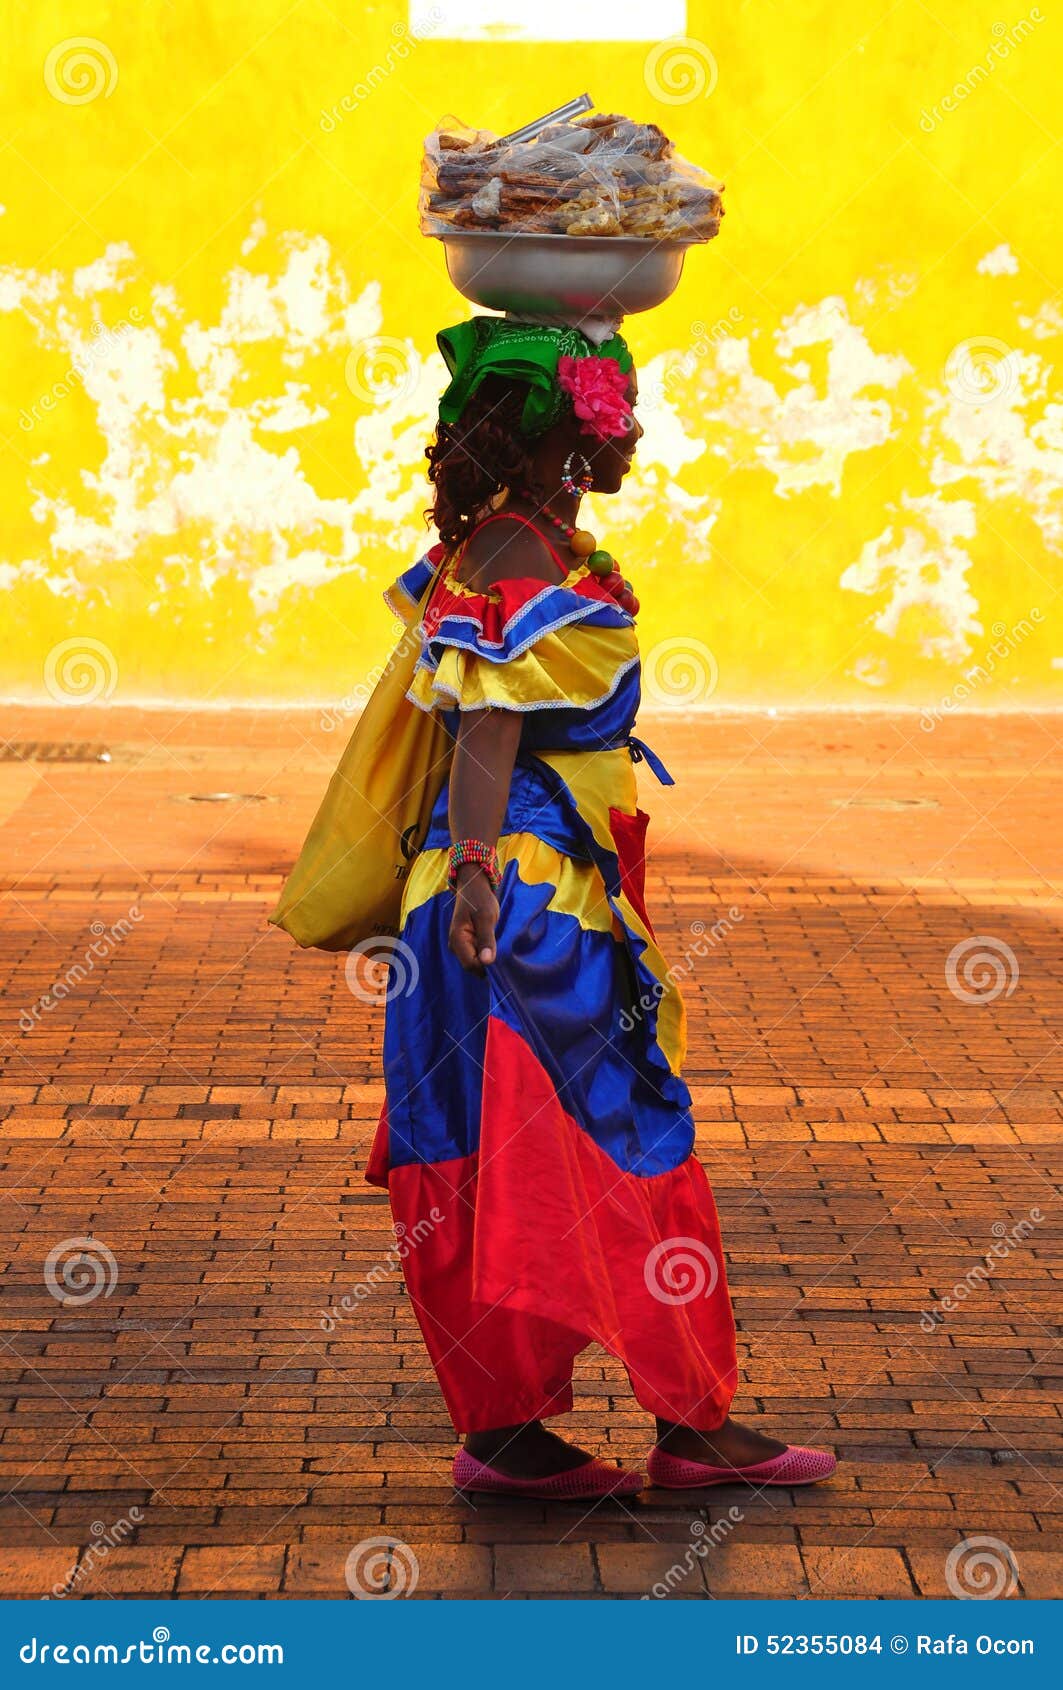 14,013 Colombian Woman Stock Photos - Free & Royalty-Free